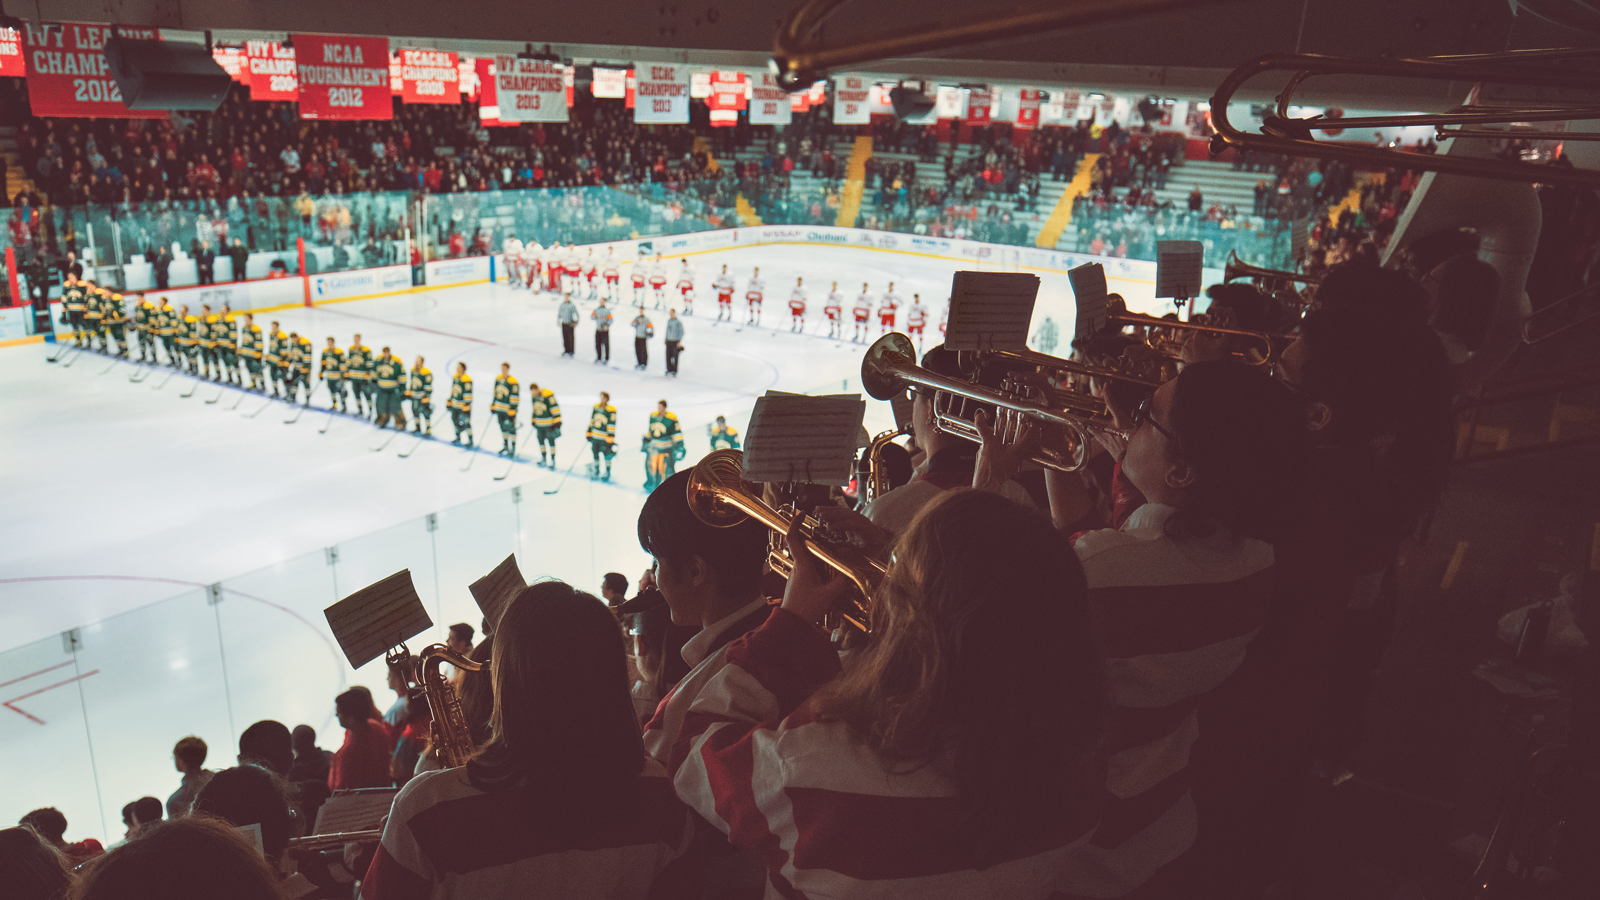 A shot of Lynah Rink at Cornell University during a men's ice hockey game, with two teams facing each other on the ice and the pep band playing in the audience.